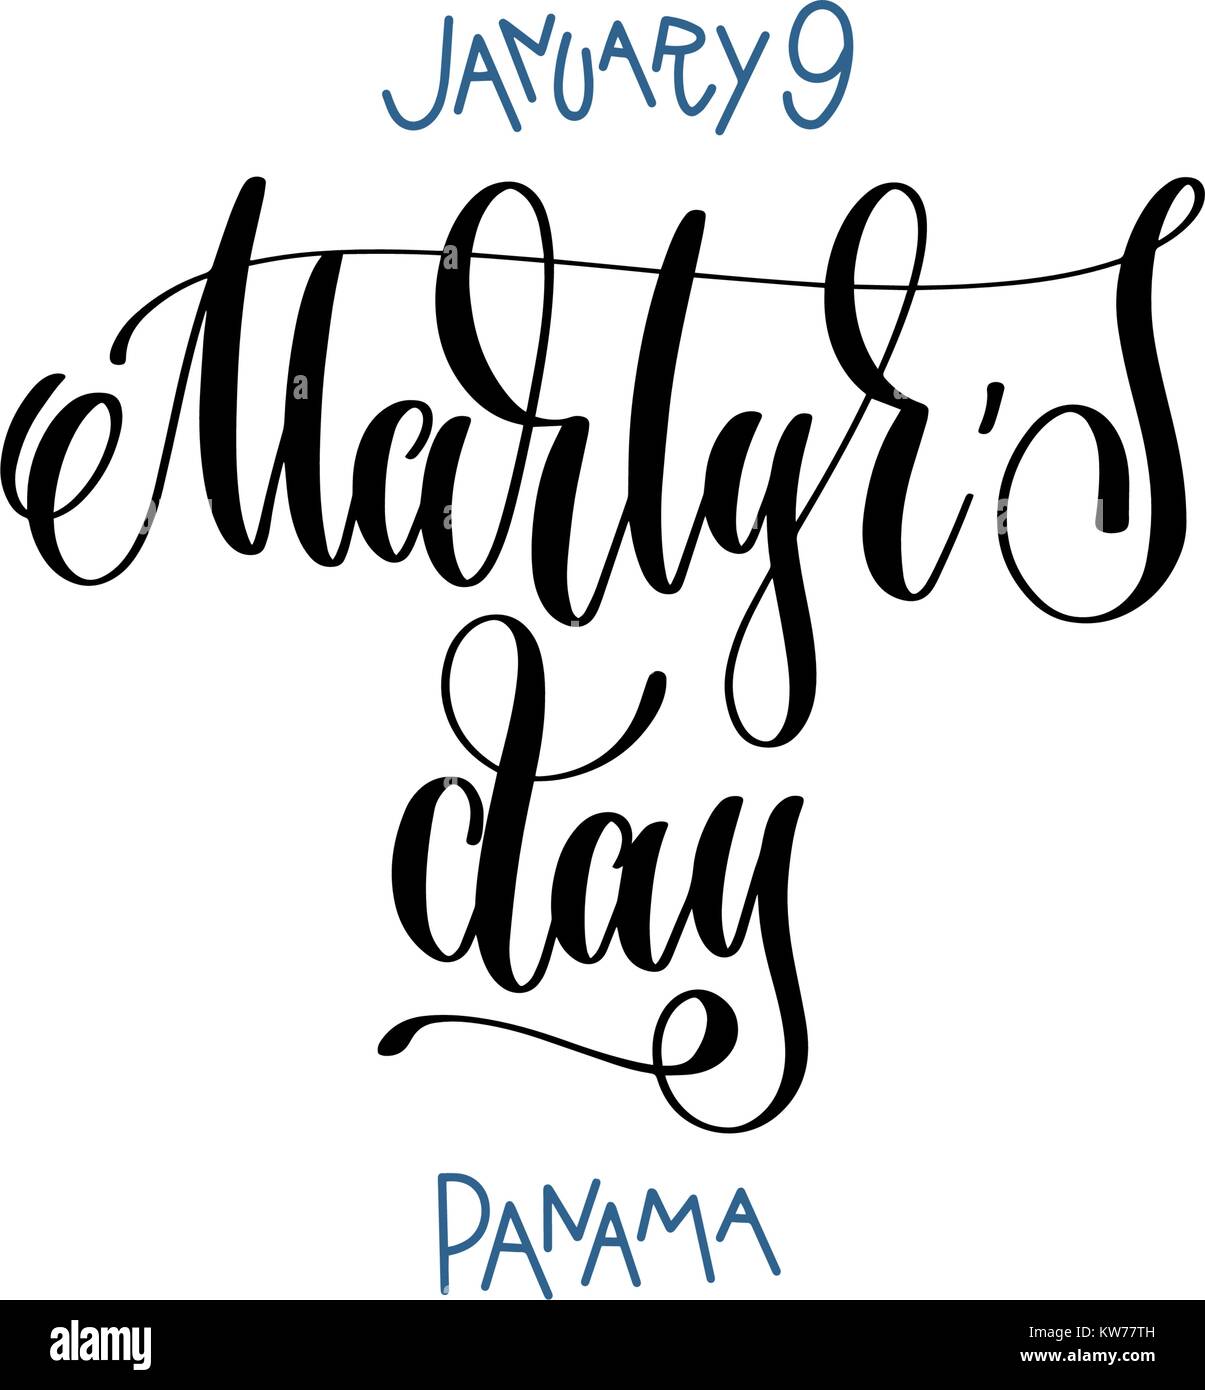 january 9 - Martyr's day - panama, hand lettering  Stock Vector